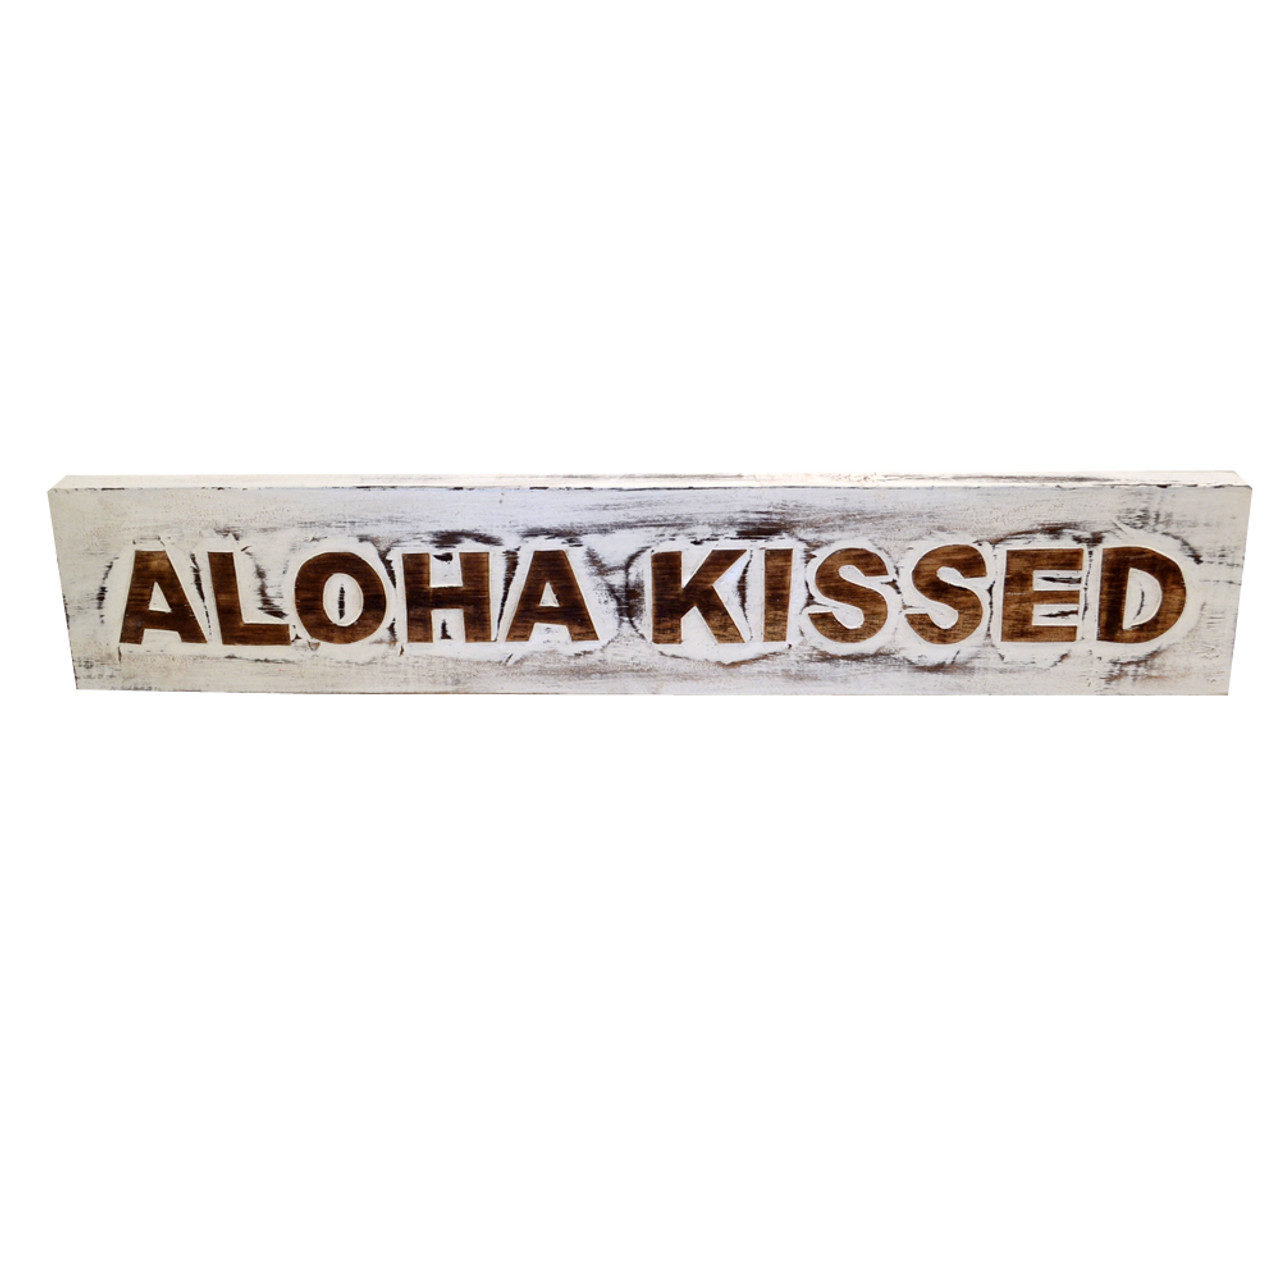 Beach Decor Aloha Kissed  wall art sign
Also free stands. This piece can be hung on the wall or free stand on its own.
60cm x 10x 3 cm